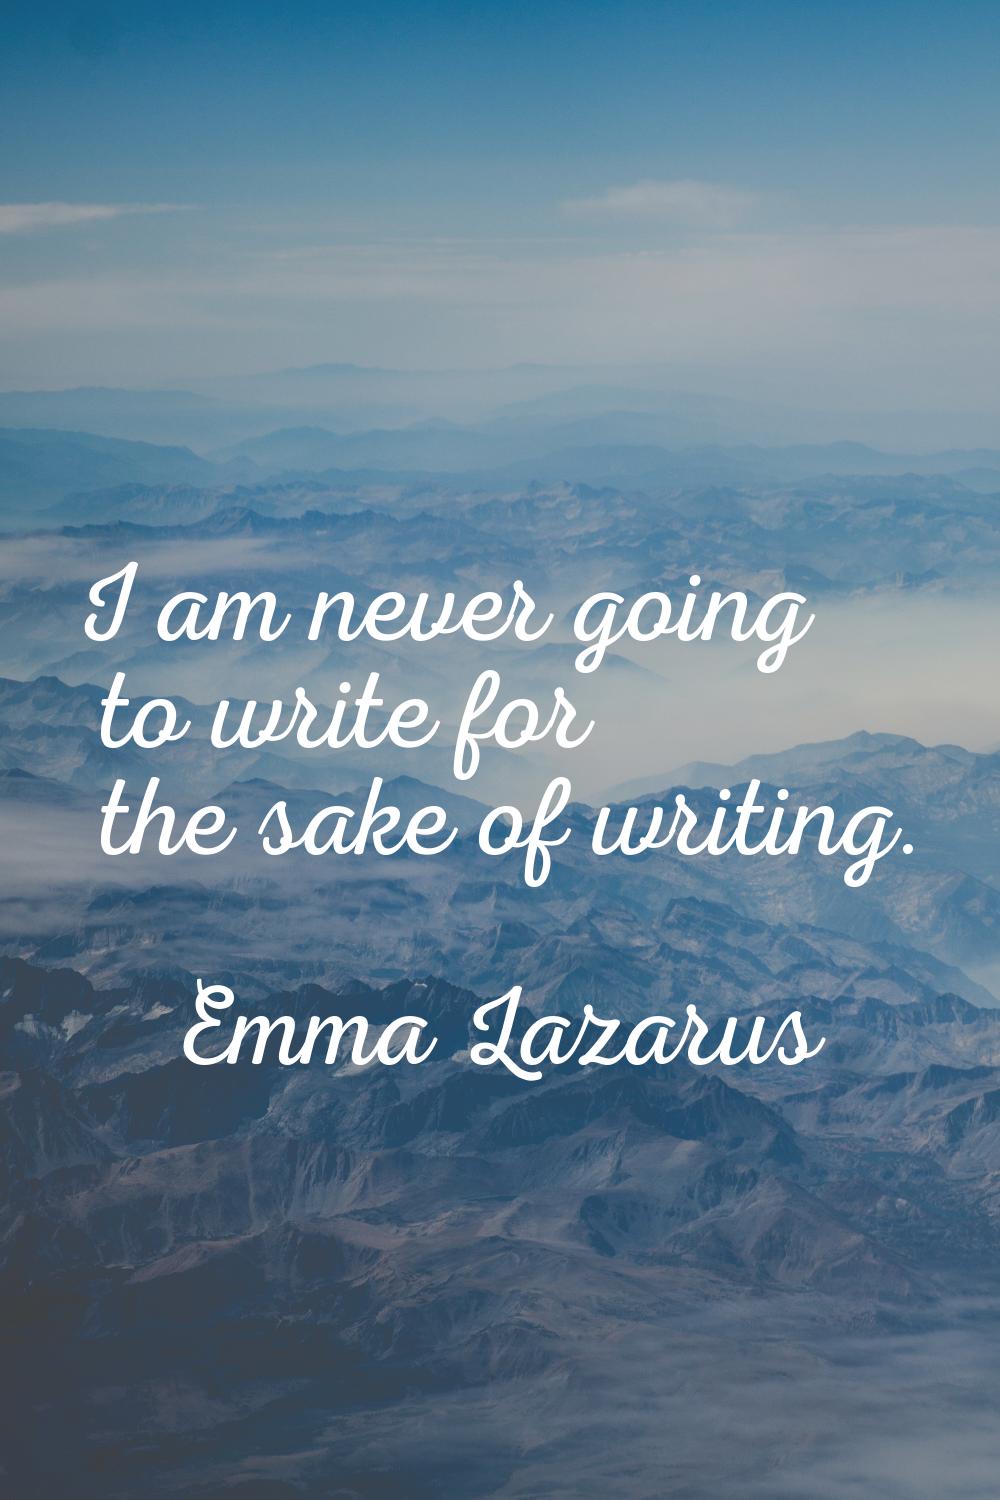 I am never going to write for the sake of writing.